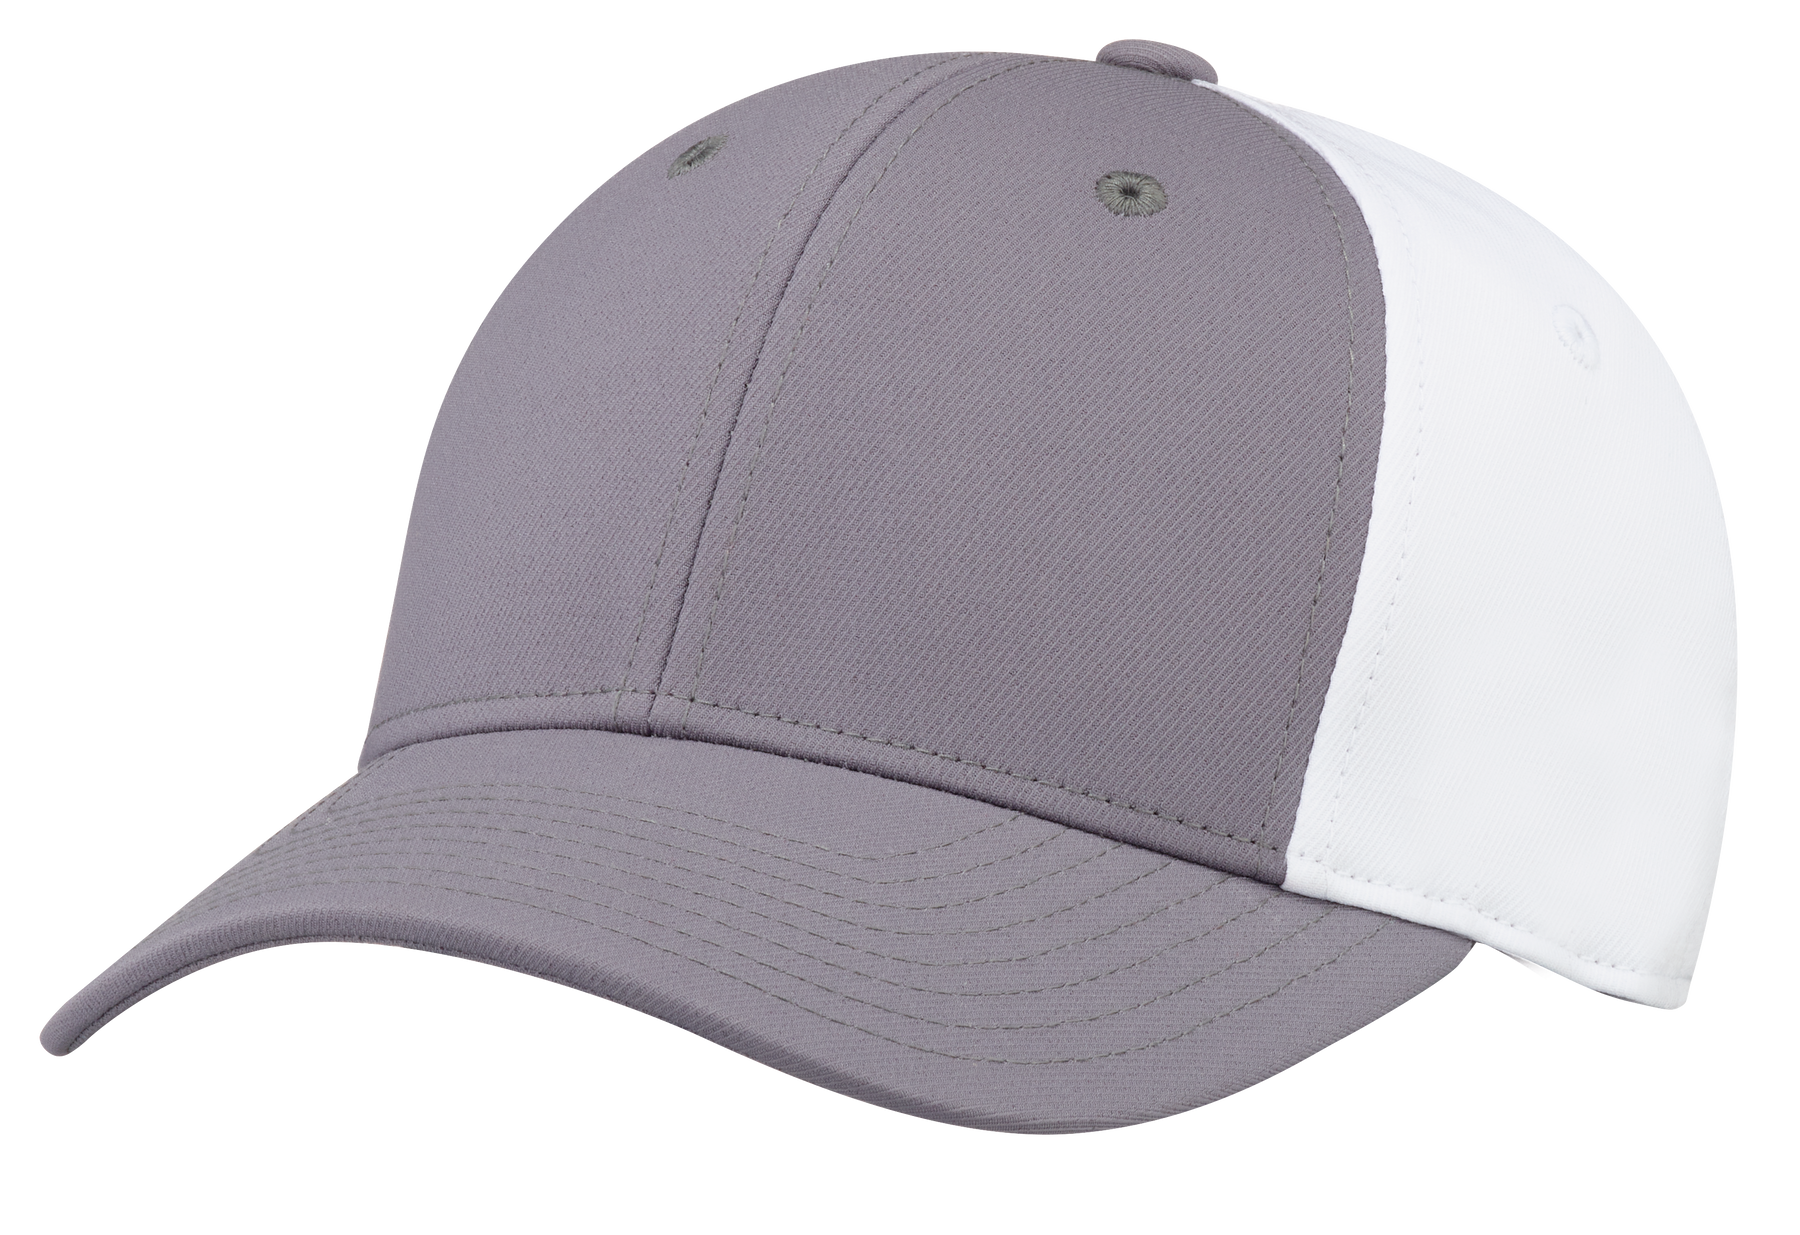 CCM Team Two Tone Structured Flex Cap Youth